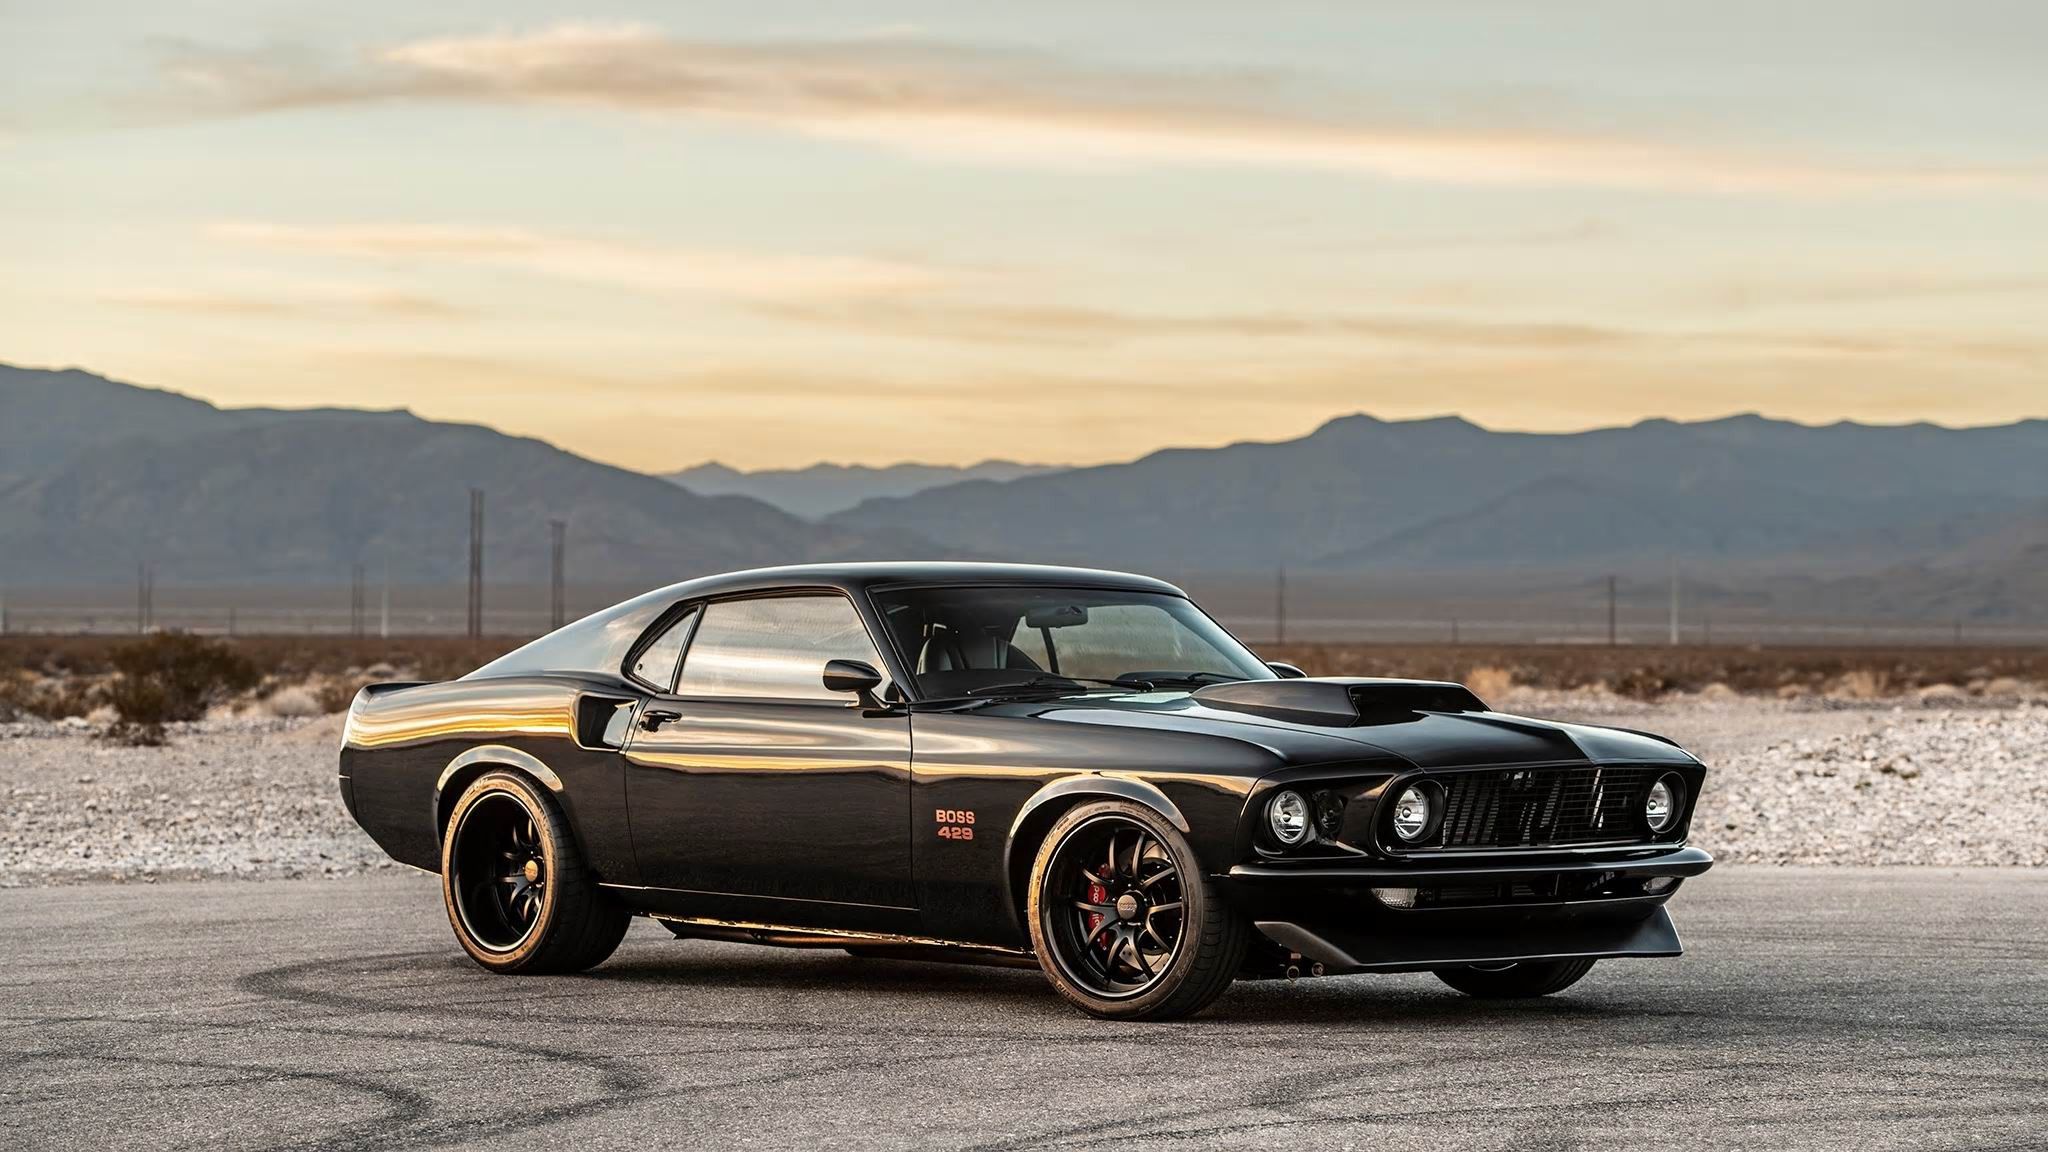 1969 Mustang Wallpapers 58 images